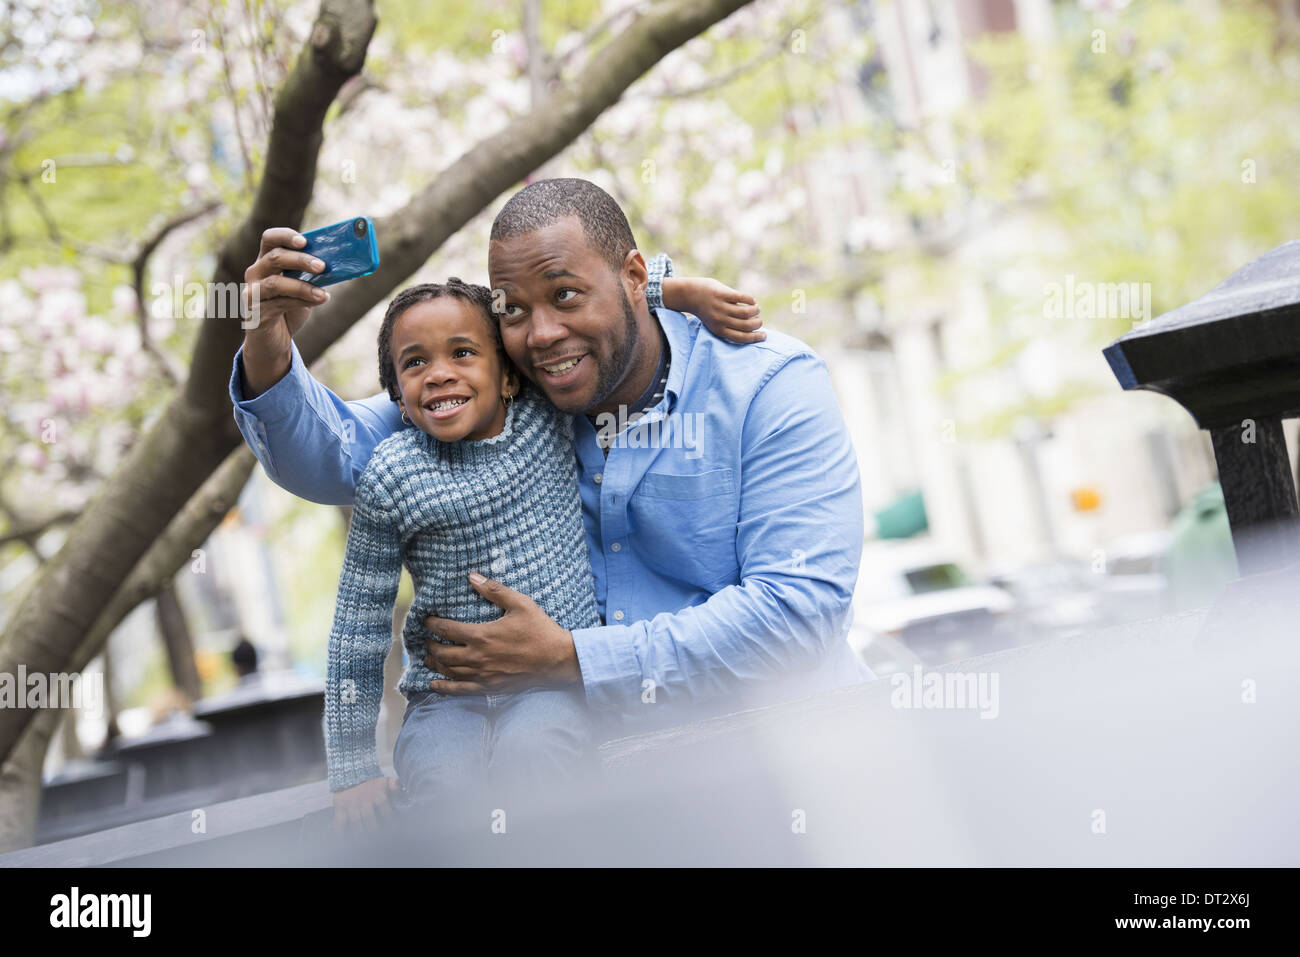 New York city park spring Sunshine and cherry blossom A father and son side by side Using a smart phone to take a picture Stock Photo